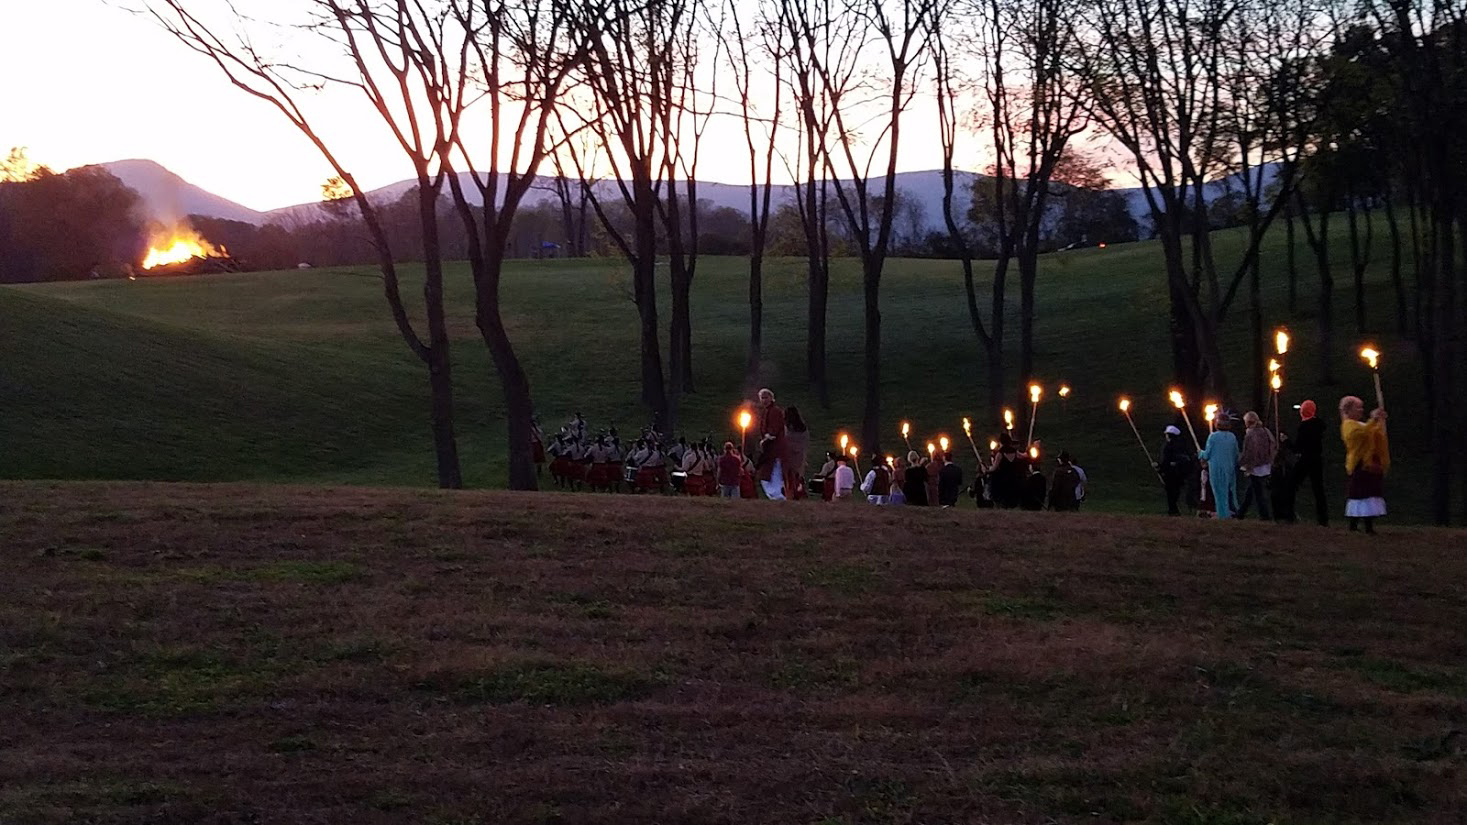 torchlight procession of pipers to the bonfire